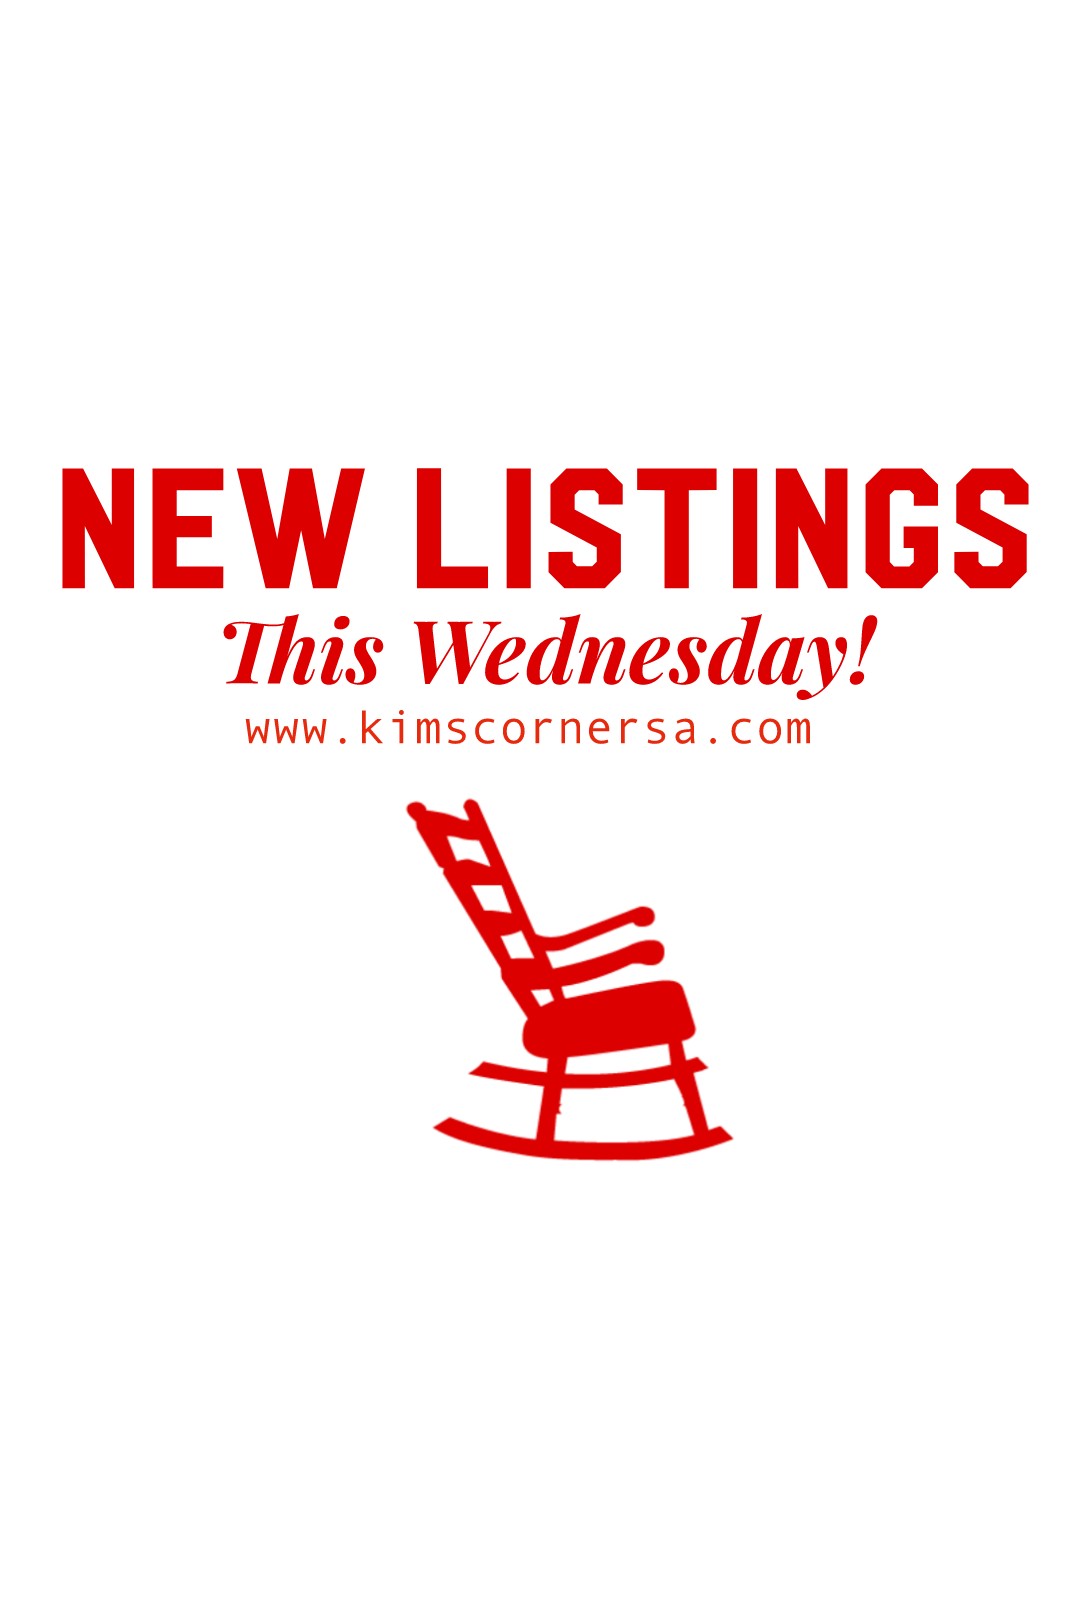 New listings tonight at 8pm!